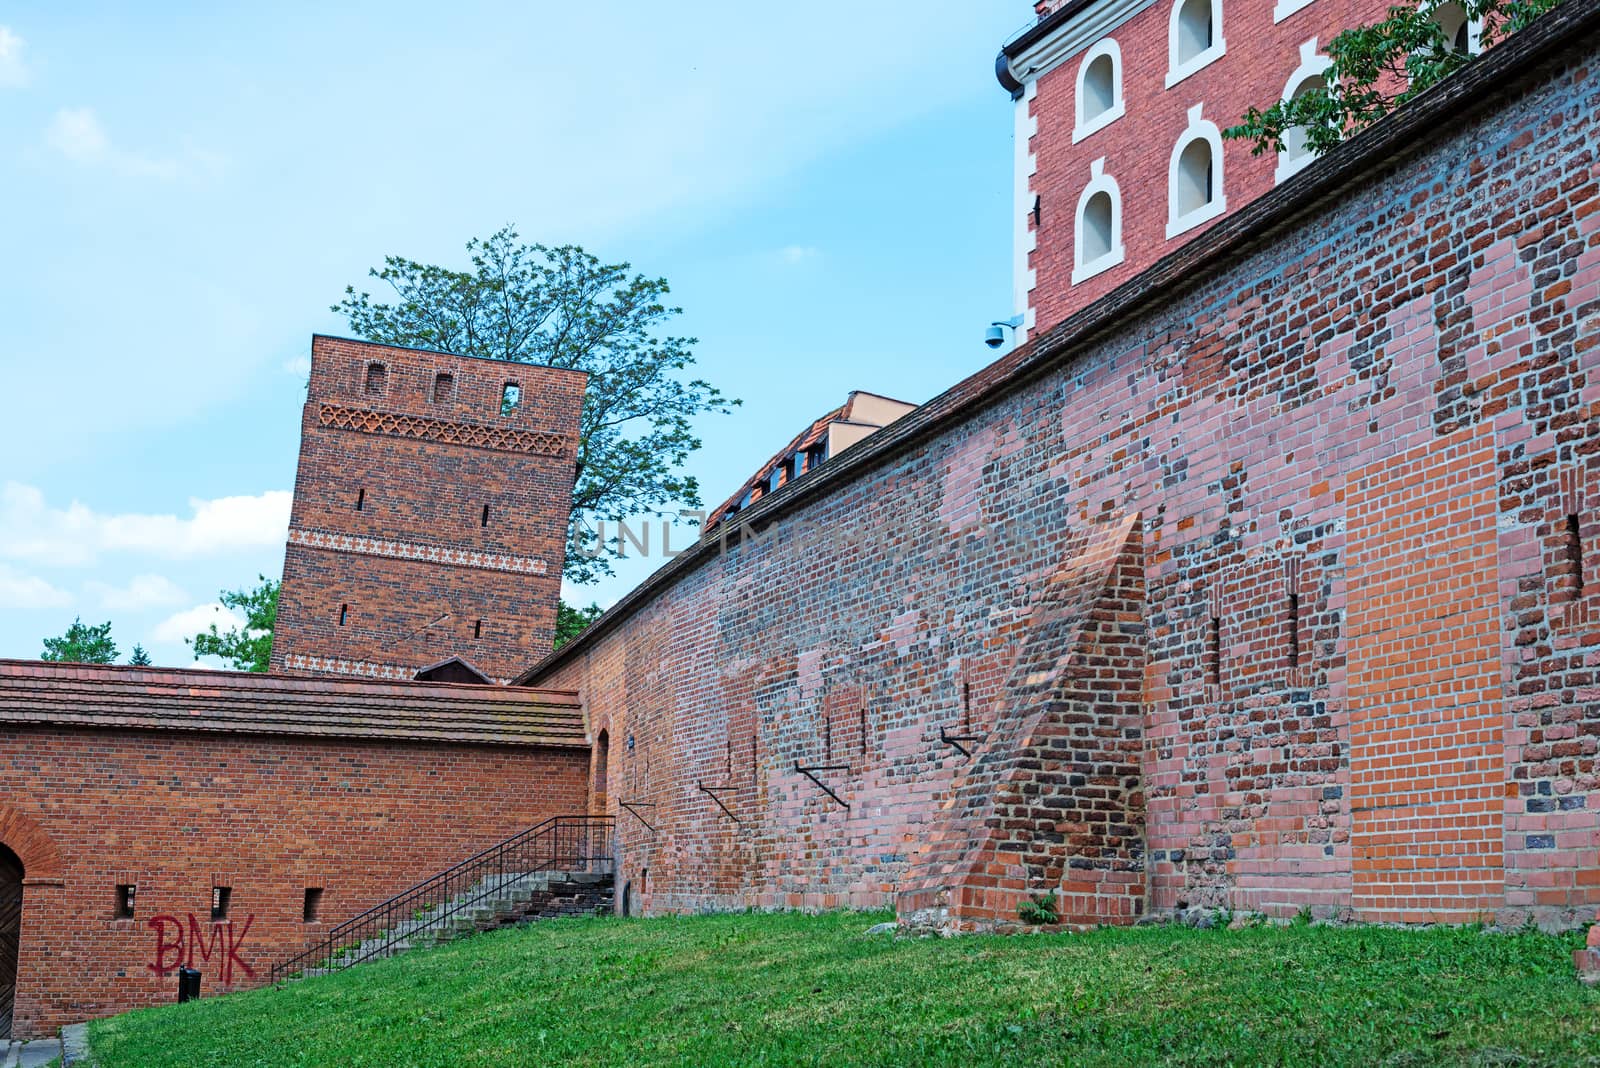 Leaning Tower of Torun, Poland by DNKSTUDIO